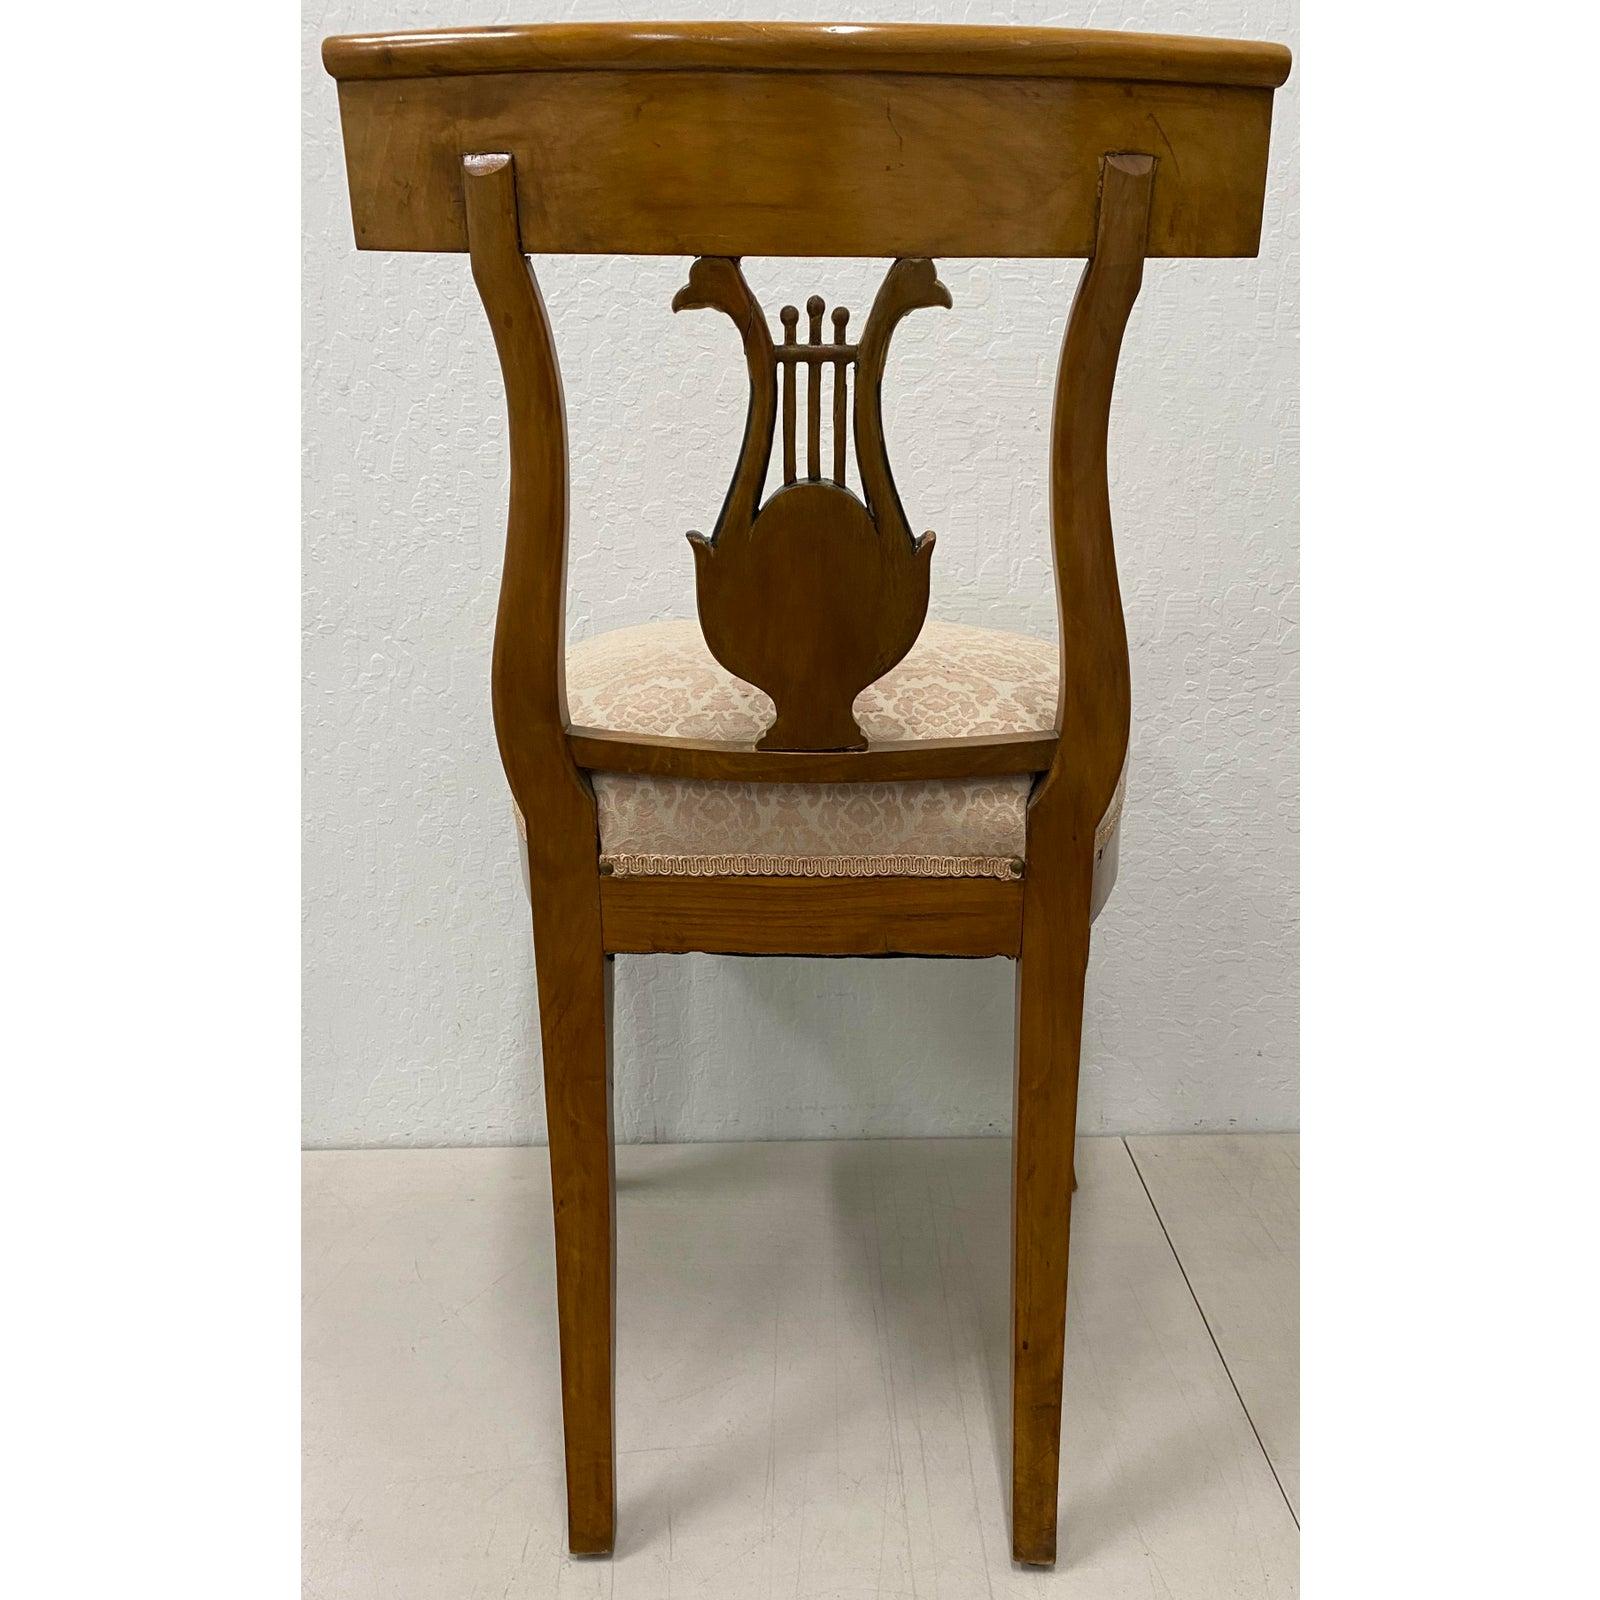 Pair of 19th century Empire Lyre back dining chairs

Wonderful pair of walnut dining chairs with carved double eagle head and lyre carving.

Measures: 20